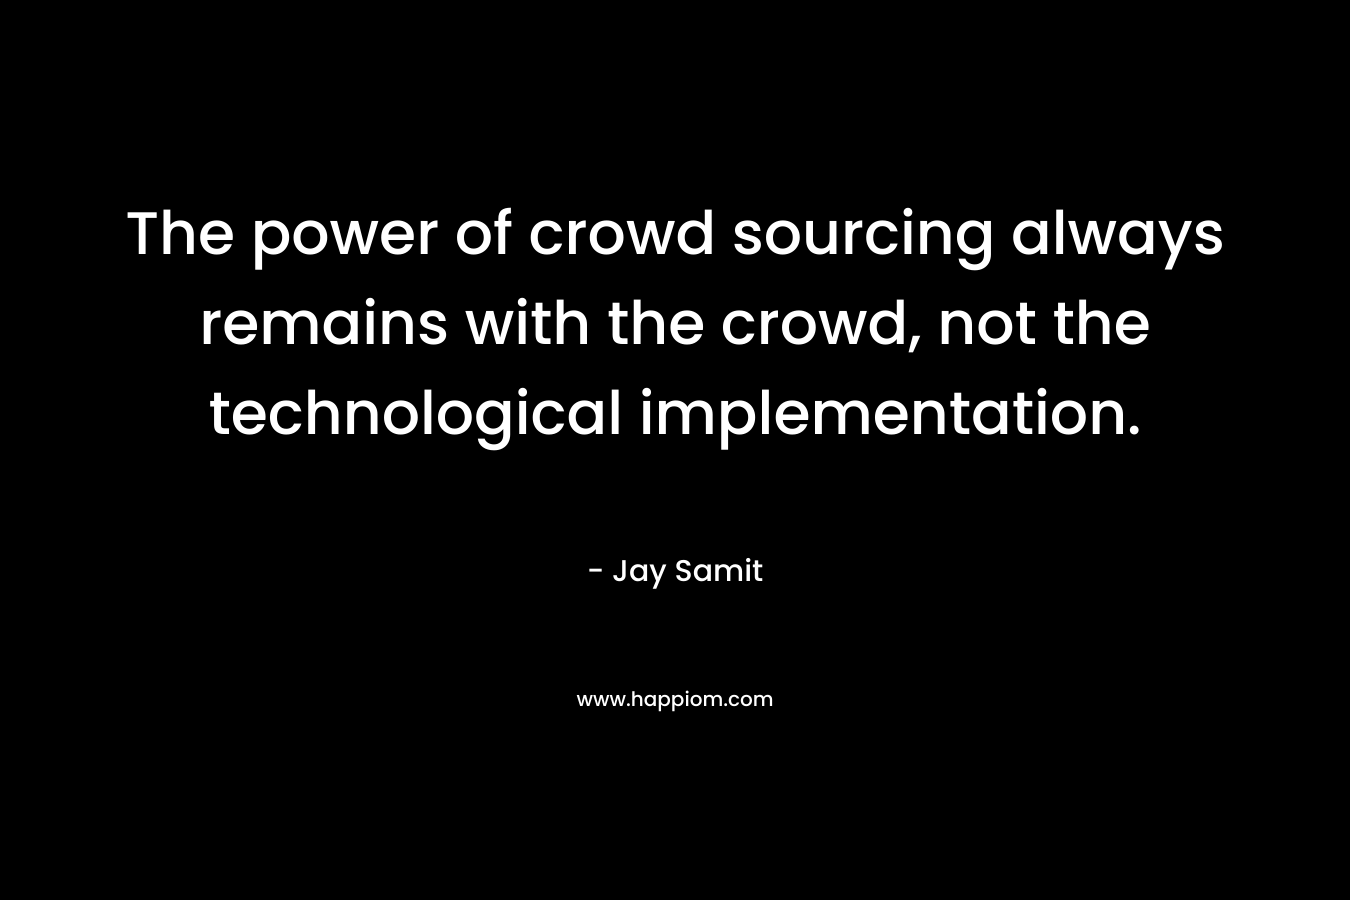 The power of crowd sourcing always remains with the crowd, not the technological implementation.